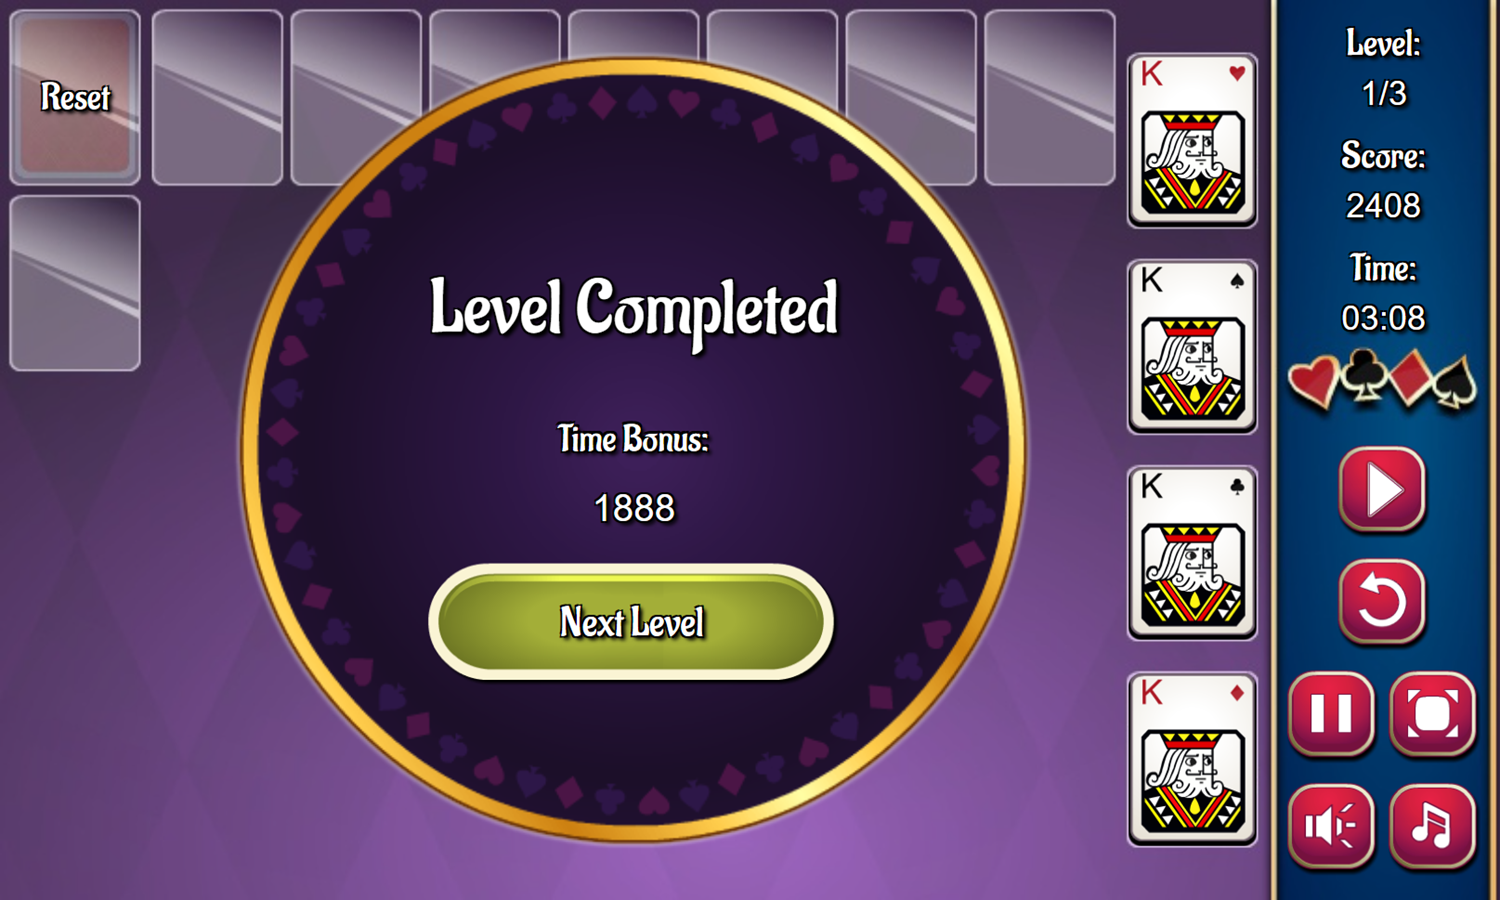 Saratoga Solitaire Game Level Completed Screenshot.